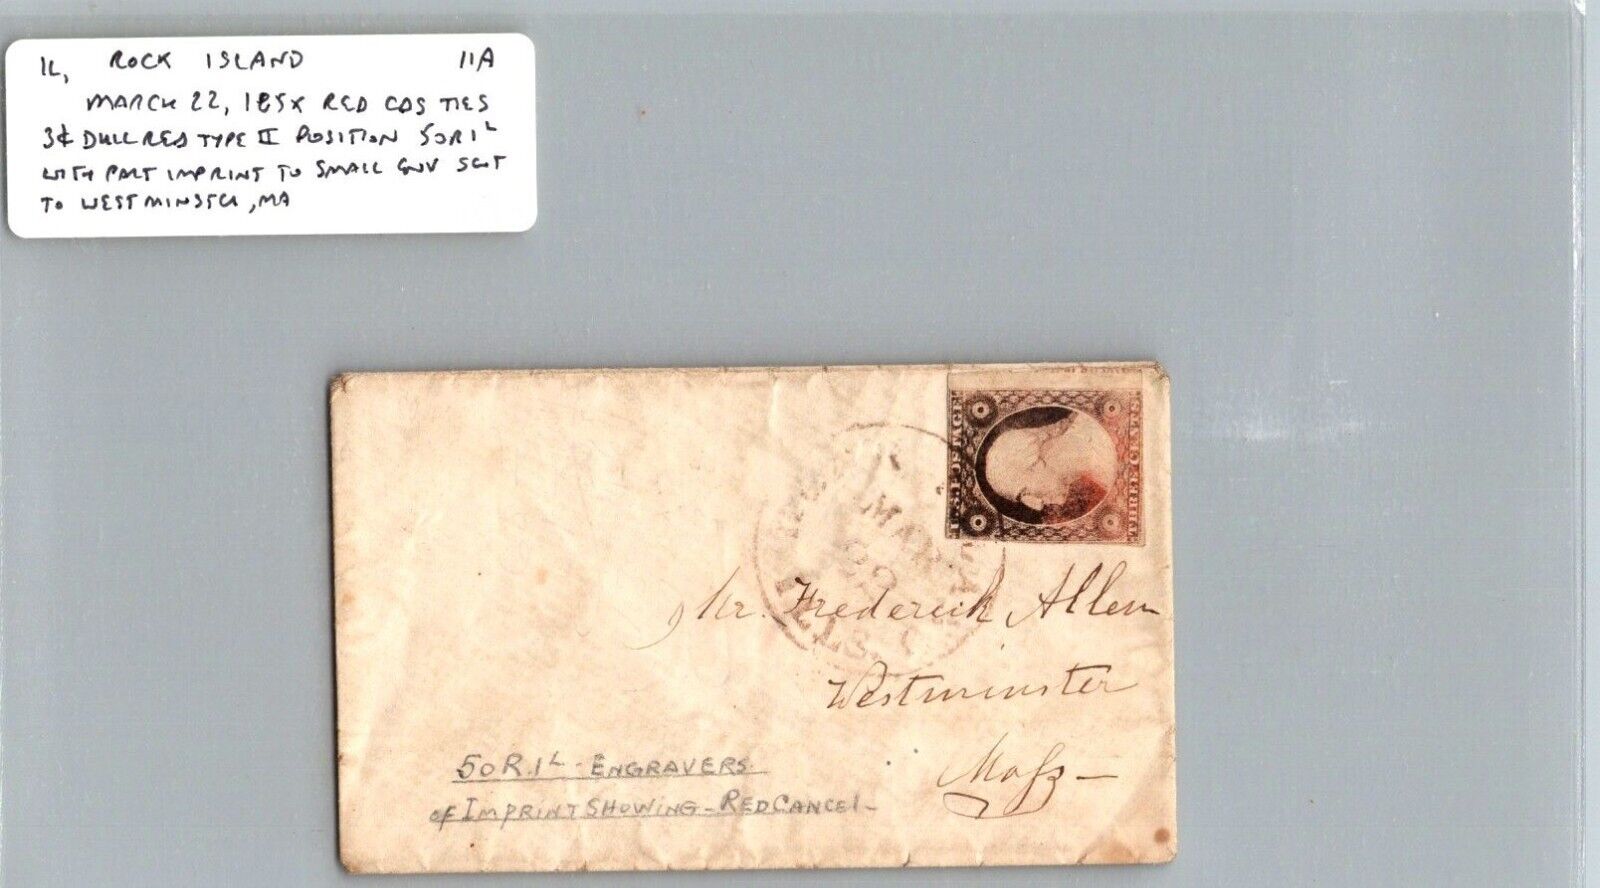 US Mar 22 185x Scott #11a CDS Postmarked Rock Island IL to Westminster MA Plated